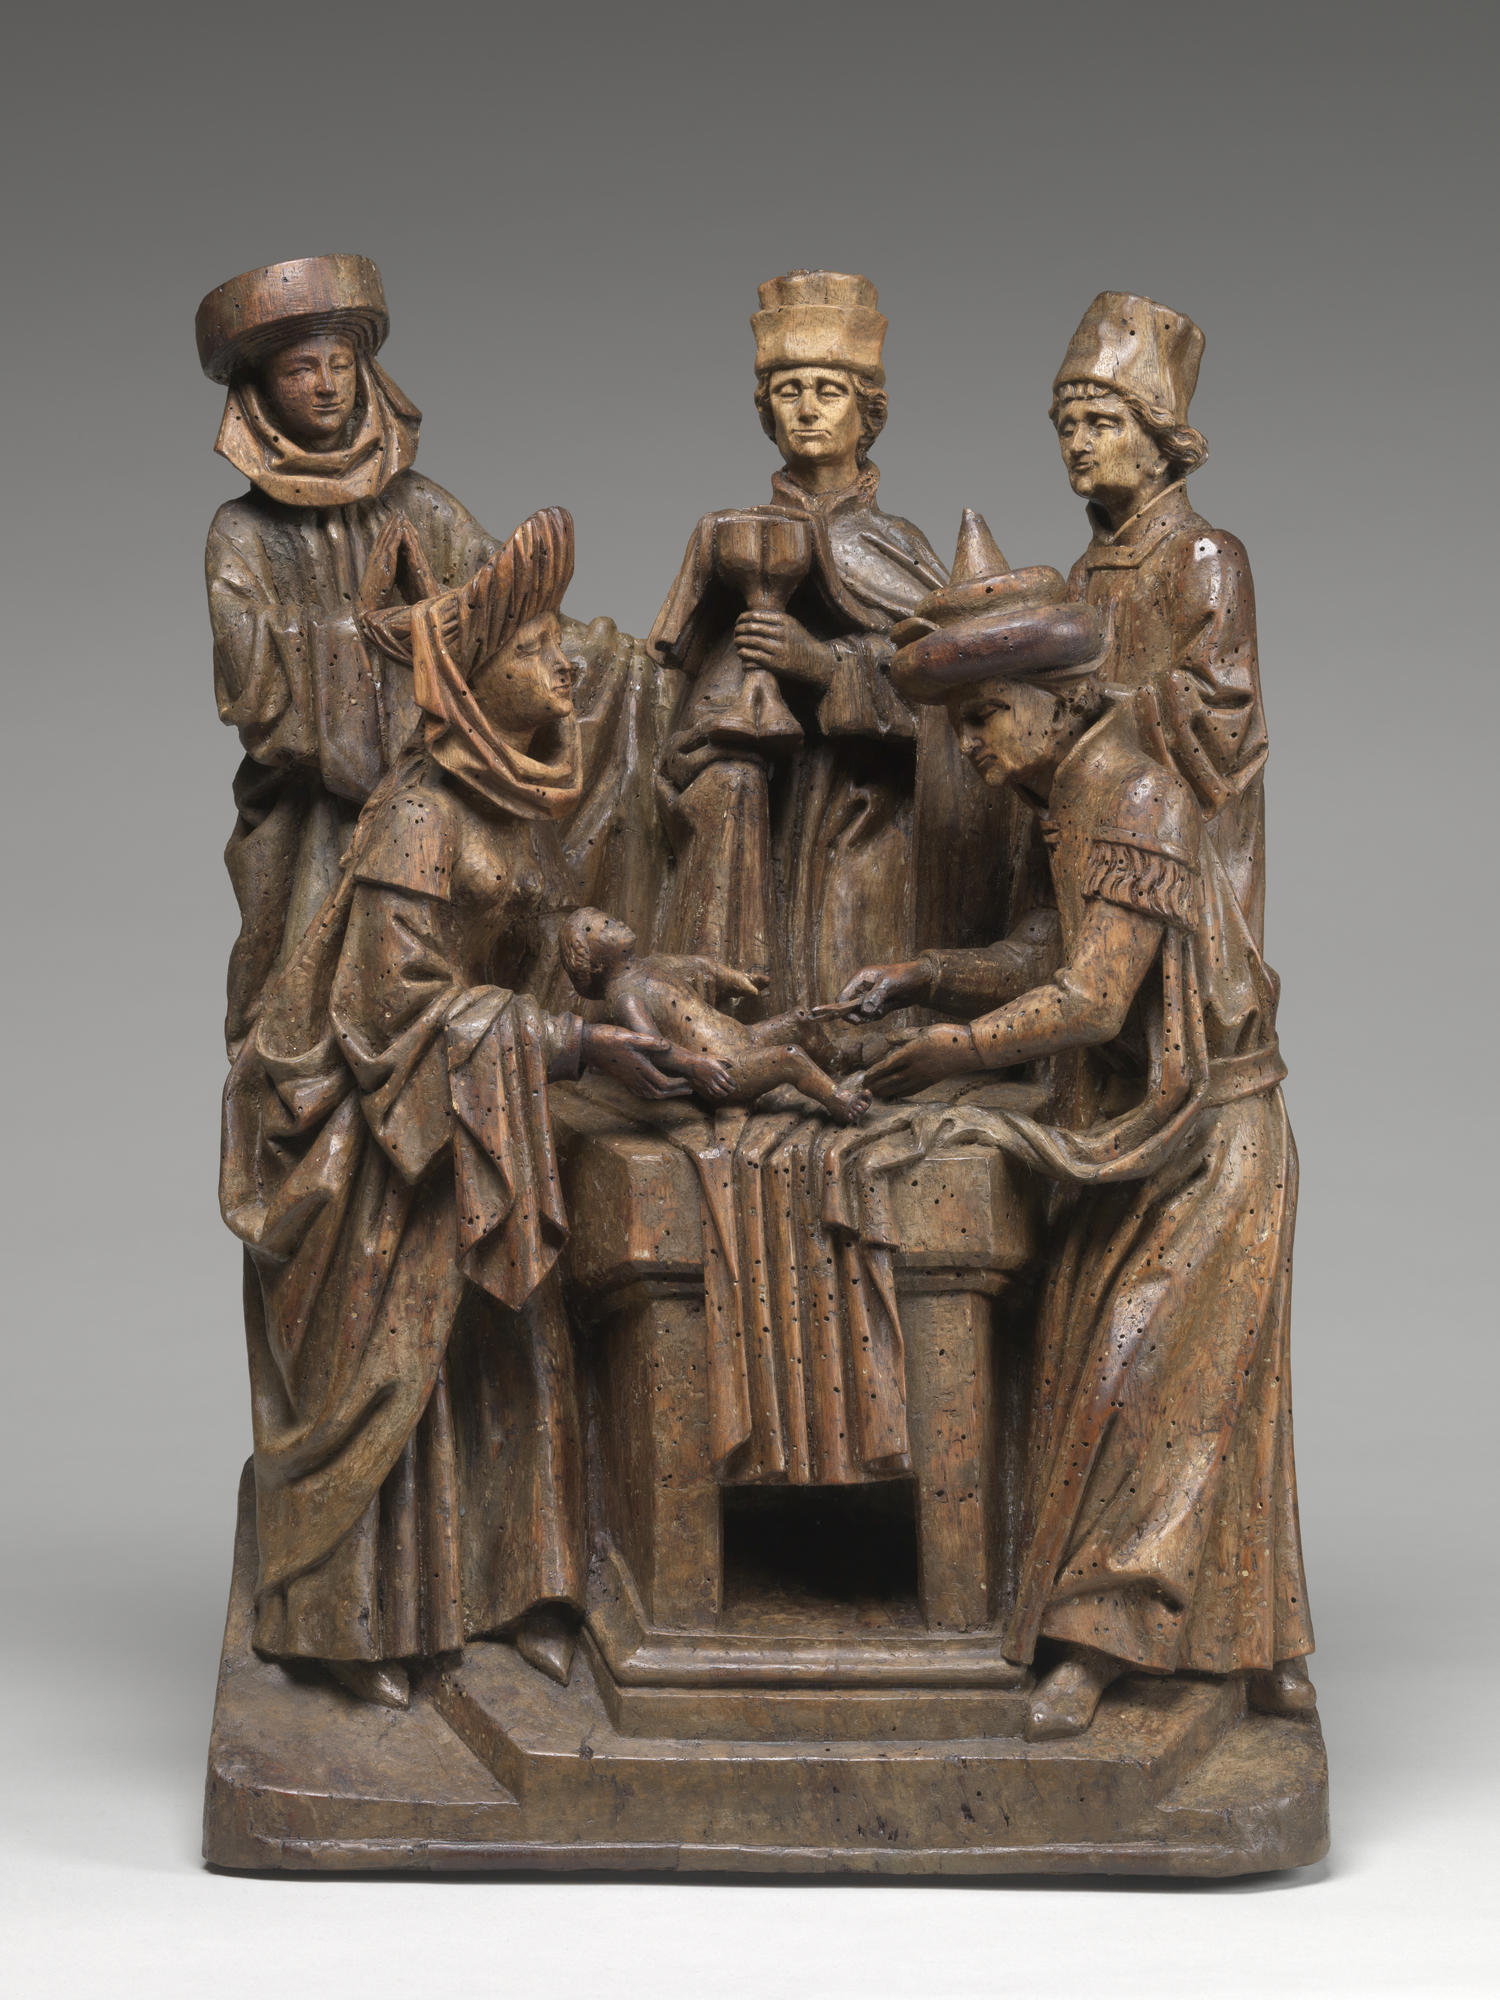 Wood sculpture The Circumcision of Christ, featuring five figures in historic dress standing around a baby lying on an altar.